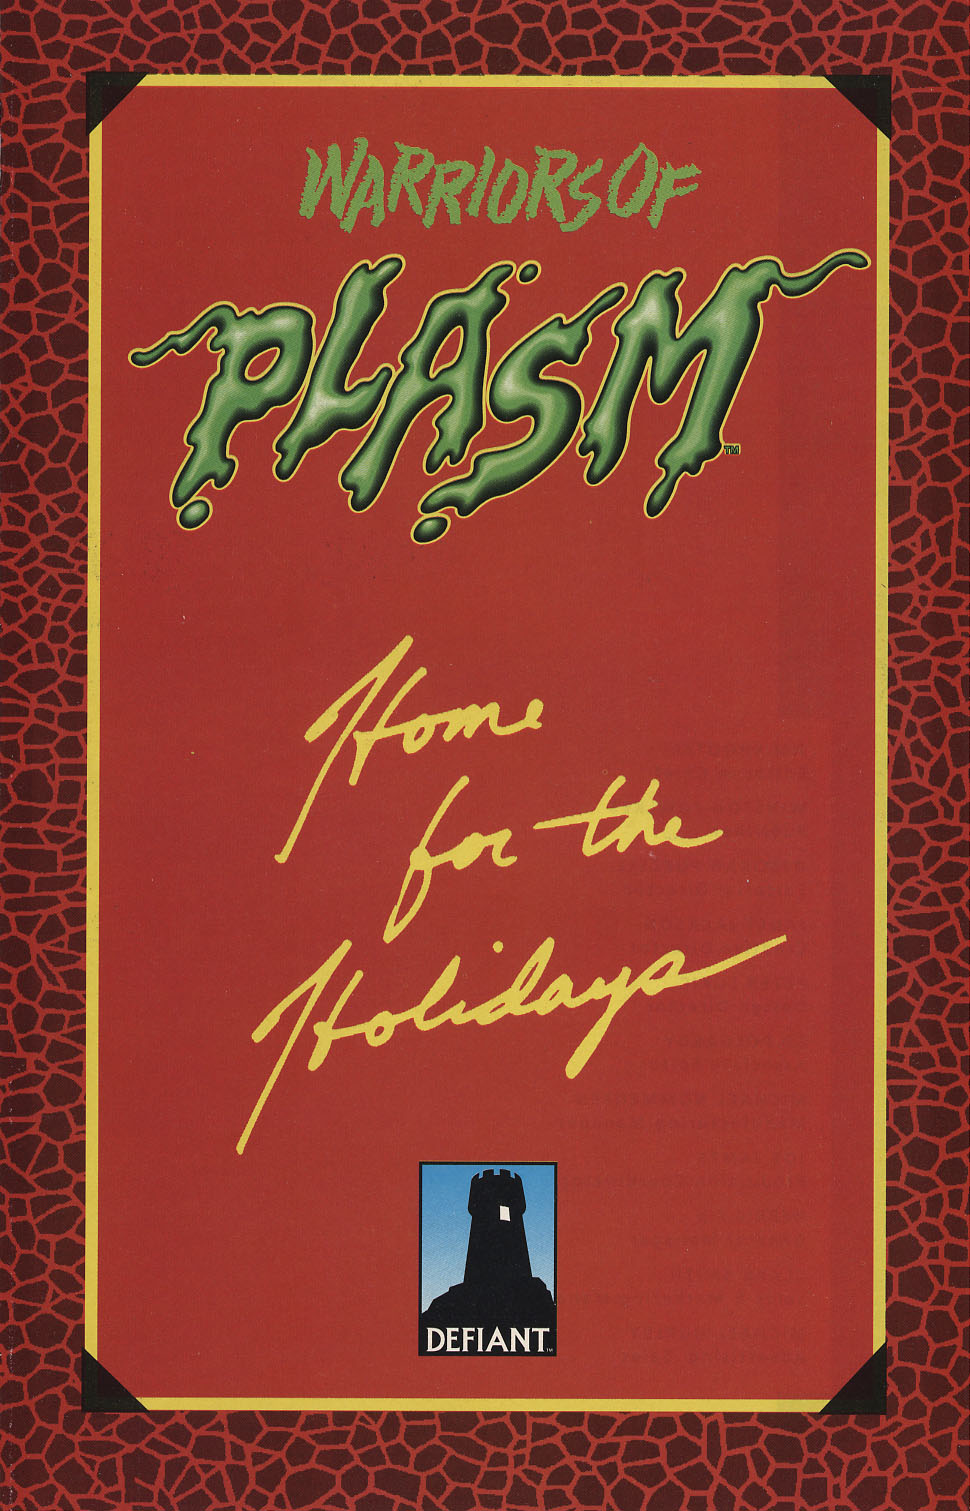 Read online Warriors of Plasm: Home for the Holidays comic -  Issue # Full - 2